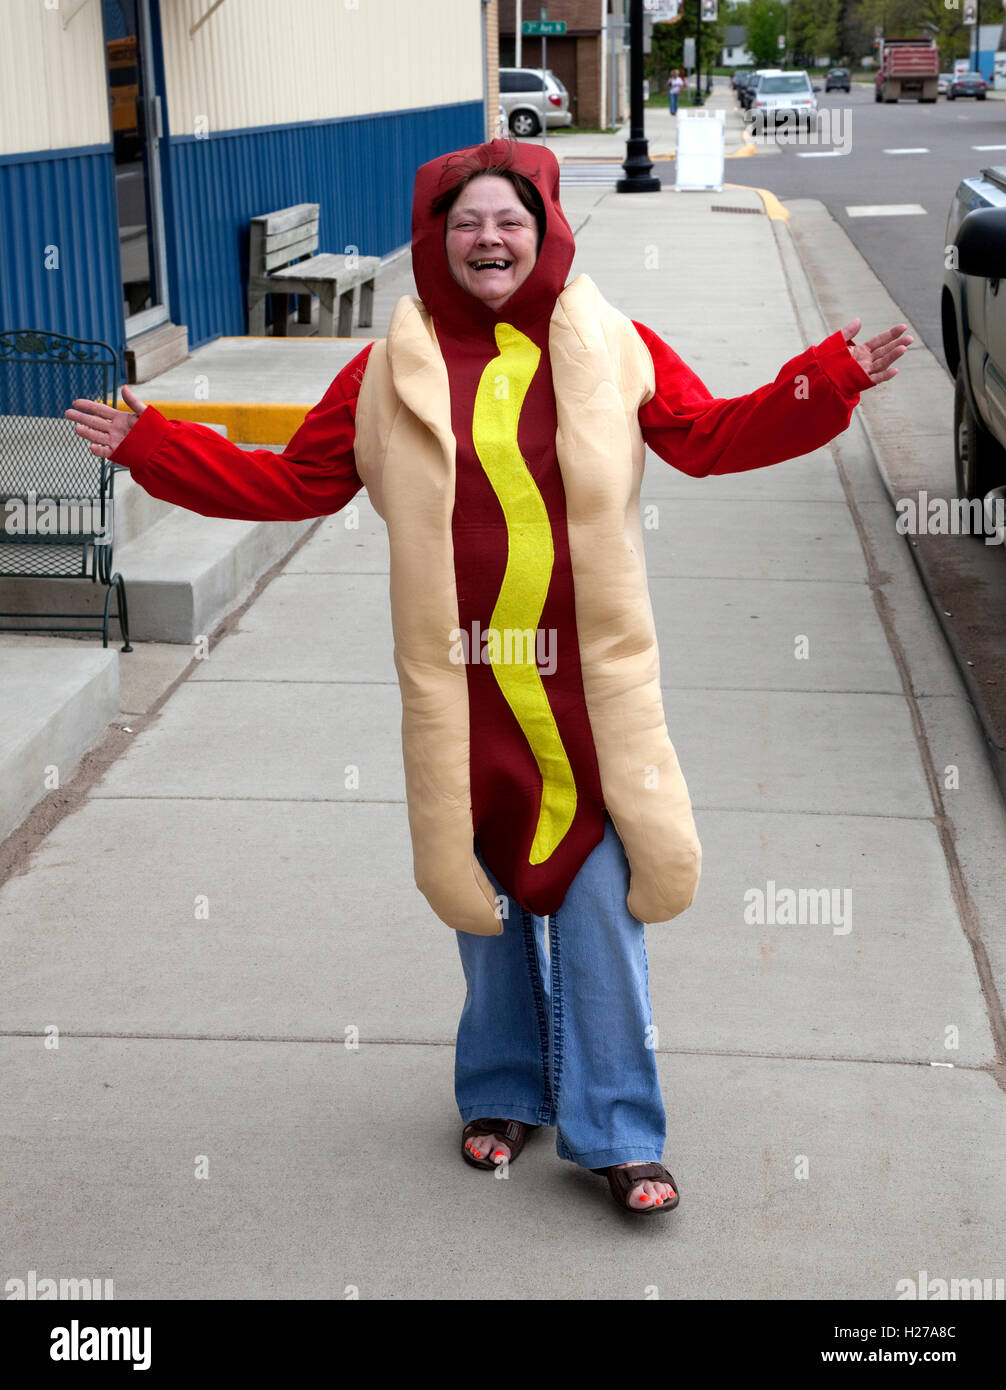 Woman in a hot dog or brat costume with a stripe of mustard advertising an outdoor barbecue grill. Pierz Minnesota MN USA Stock Photo